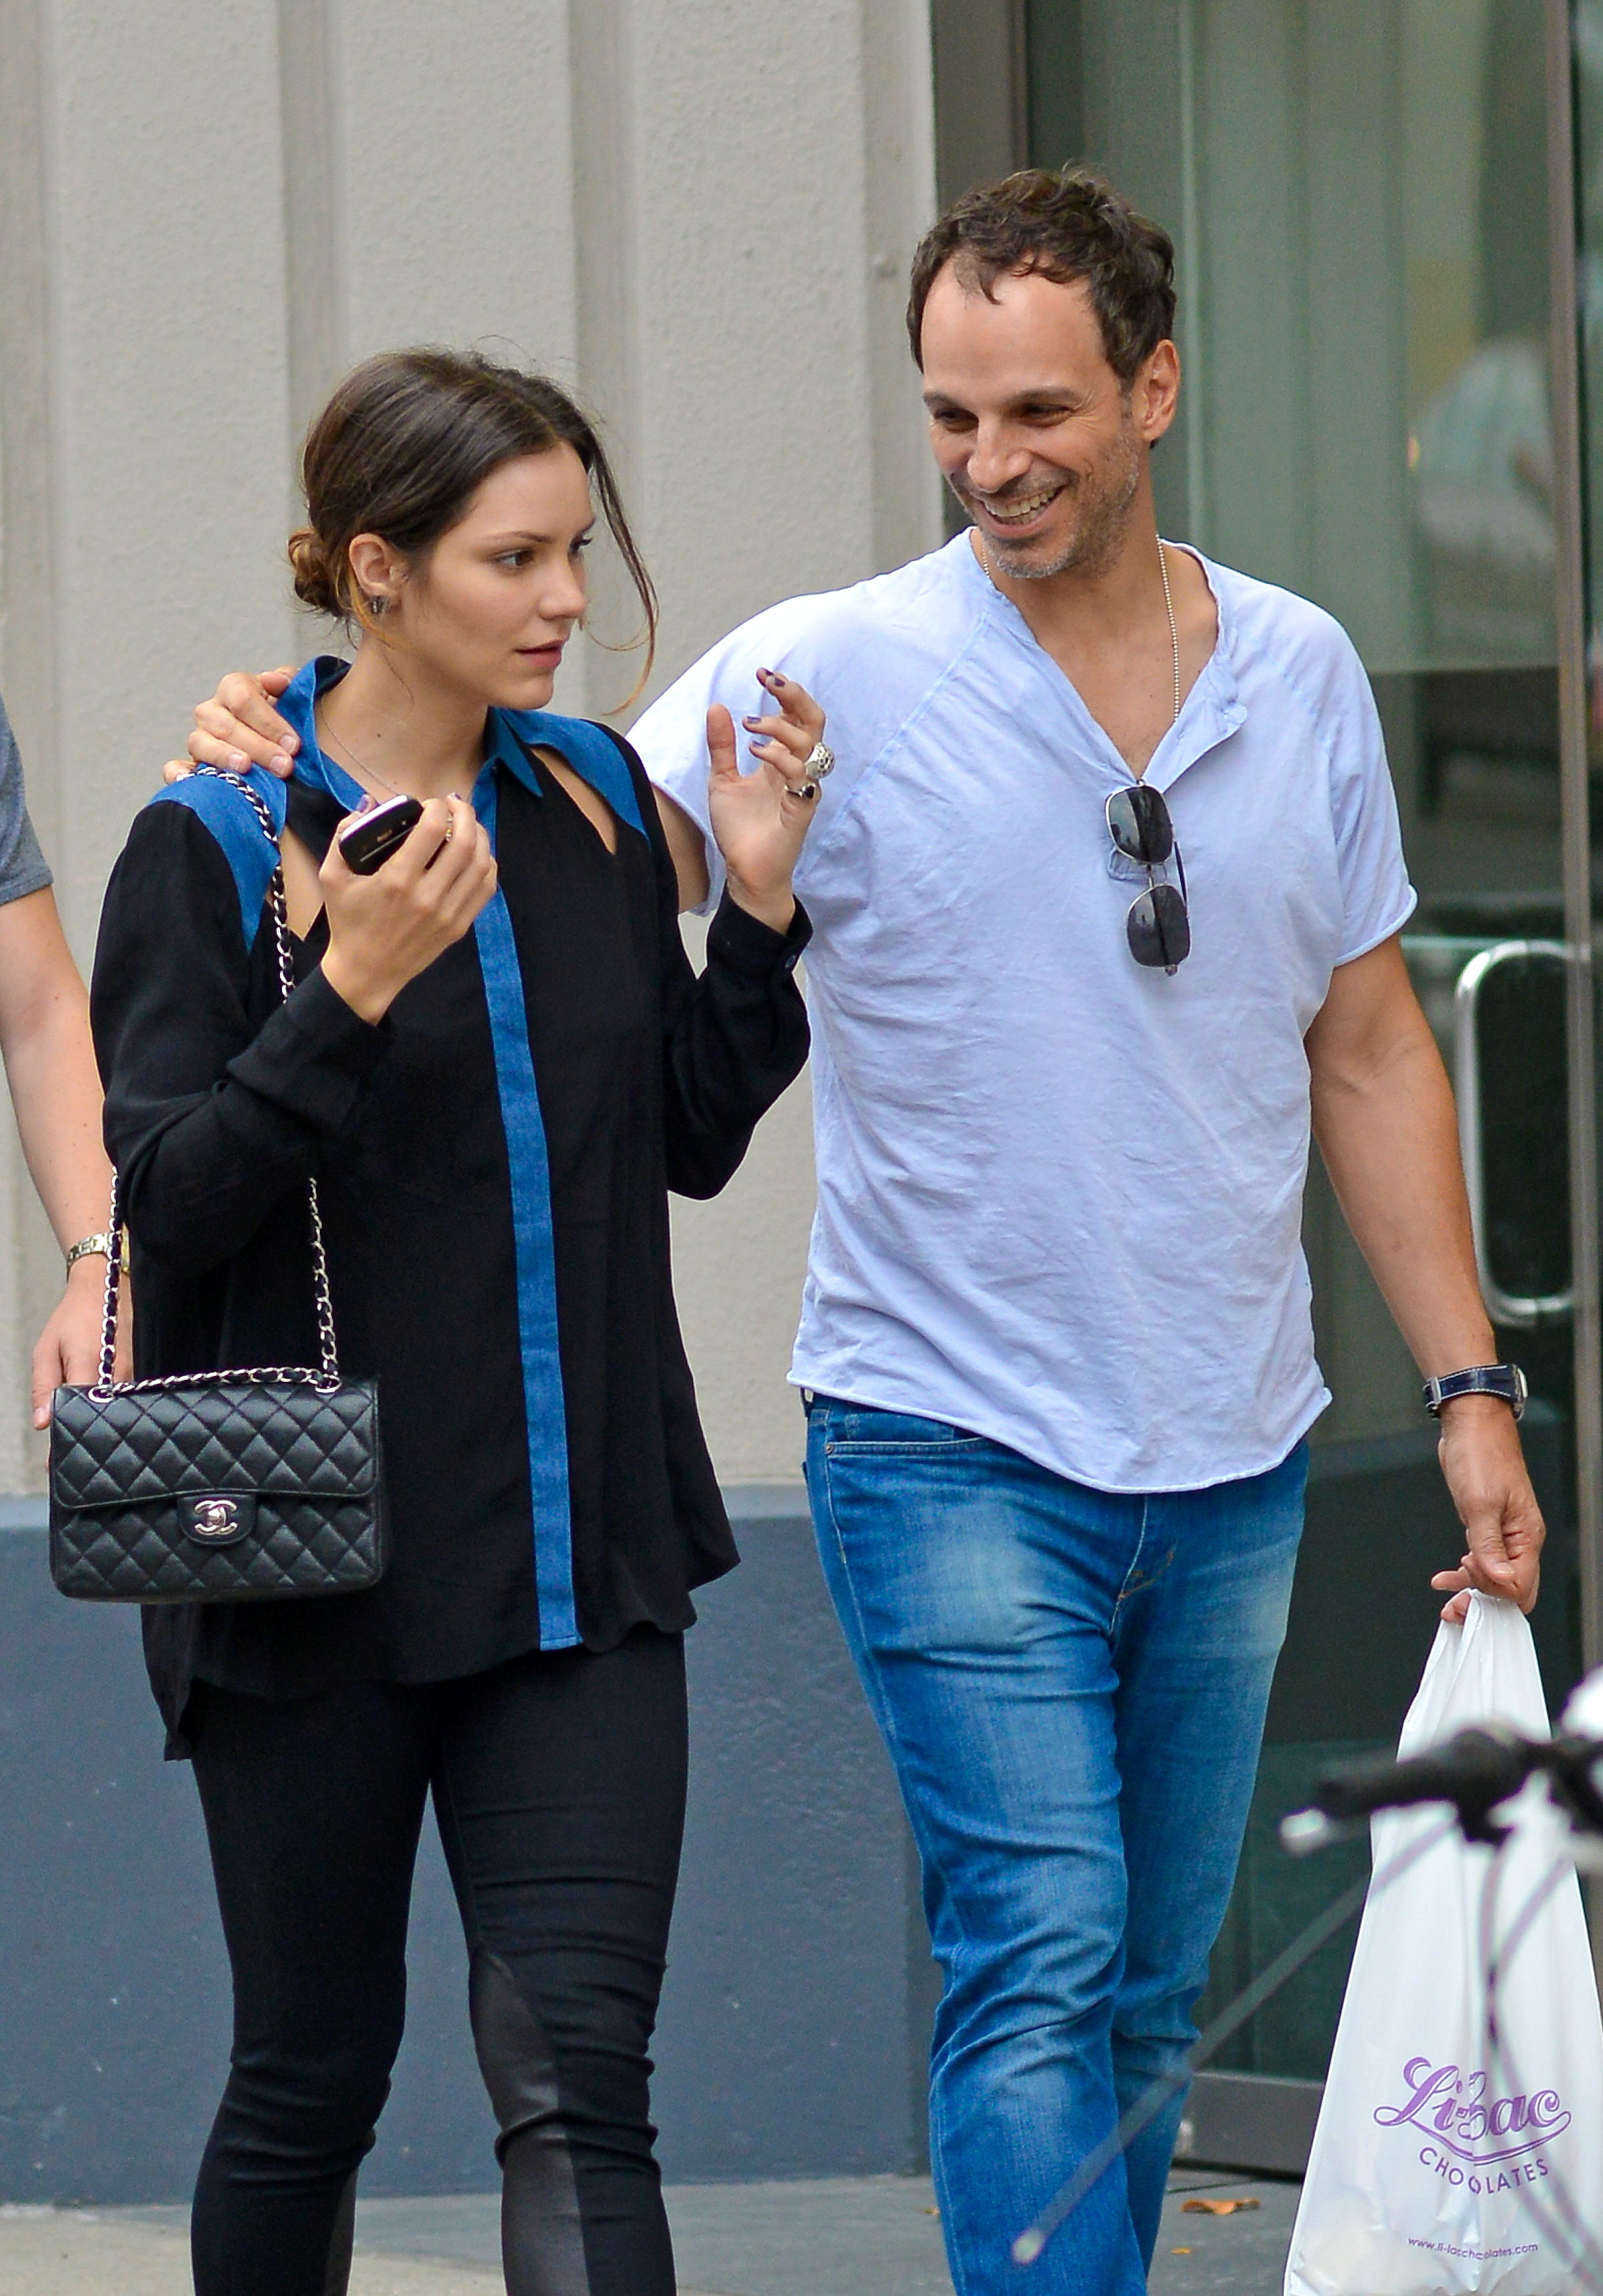 <p>Drama! Katharine McPhee had everyone talking when she was caught making out with her married "Smash" director, Michael Morris, while still married to first husband Nick Cokas in 2013. Kat and Nick split in 2014, and the singer-actress later said she has no regrets about the affair. "All of the choices I made I learned from in a really deep way," she told Ocean Drive magazine. The former "American Idol" contestant has since moved on -- she wed musician David Foster, who's 35 years her senior, in 2019.</p>